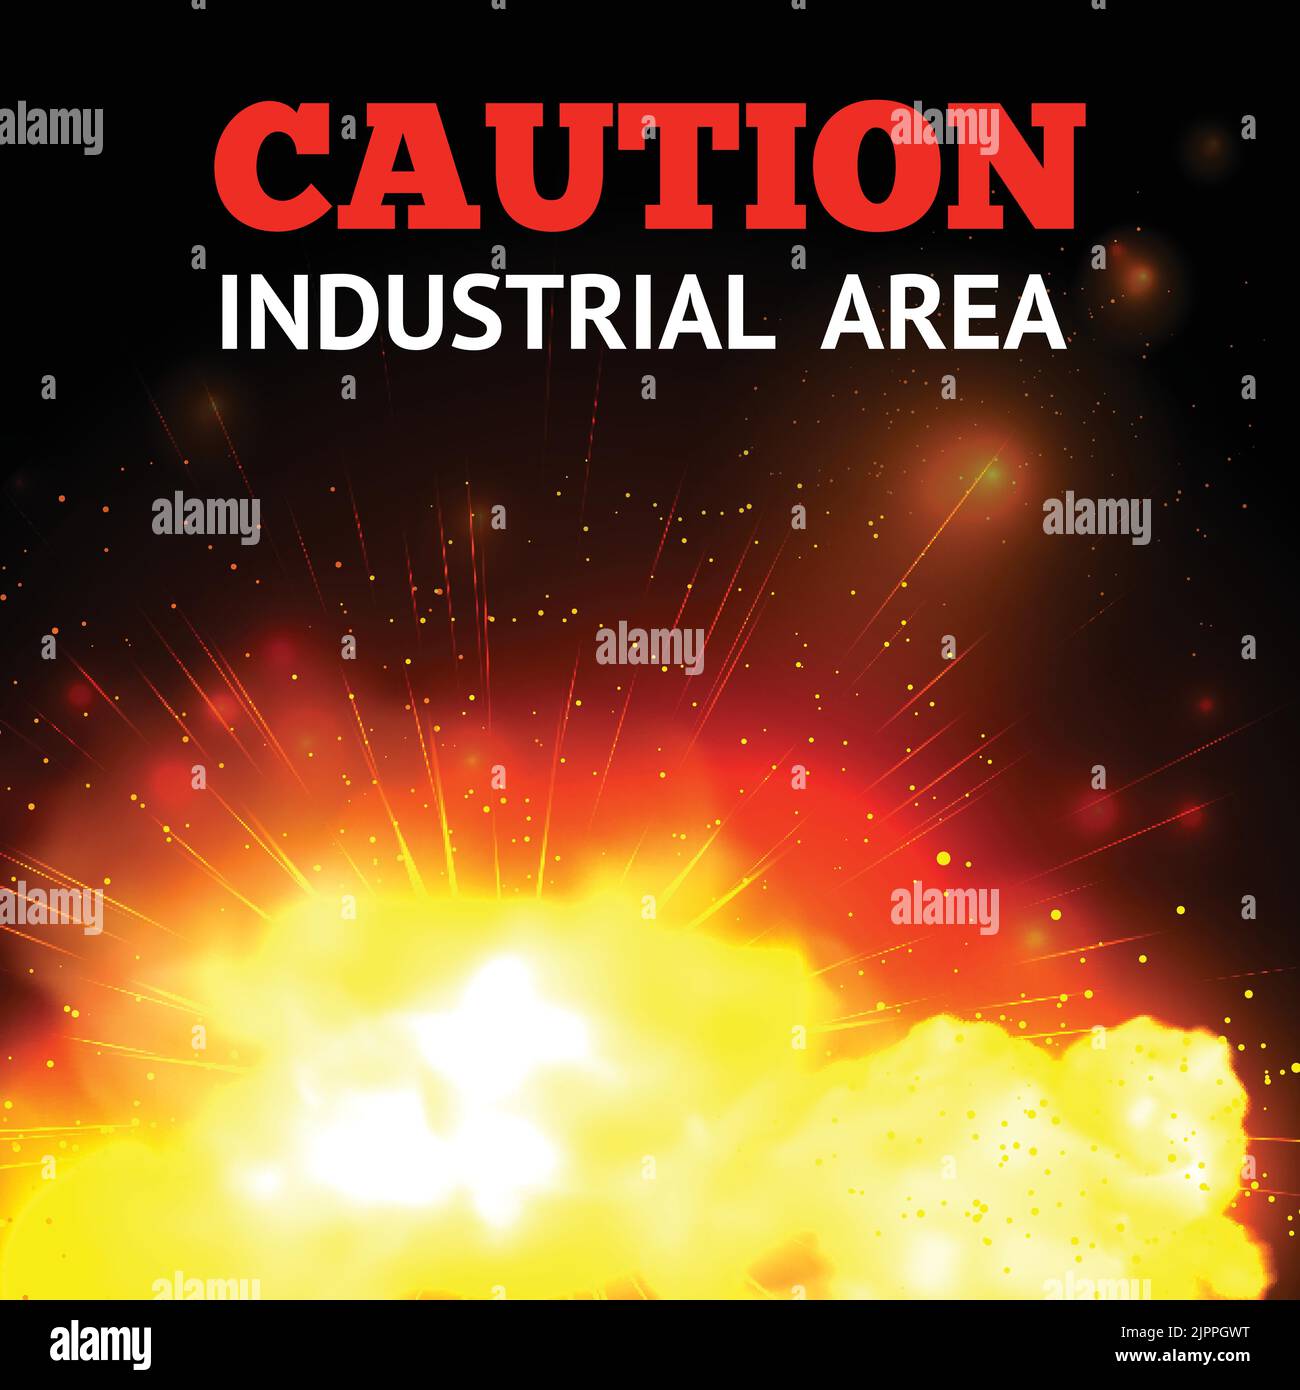 Explosion background with realistic fire and caution industrial area text vector illustration Stock Vector